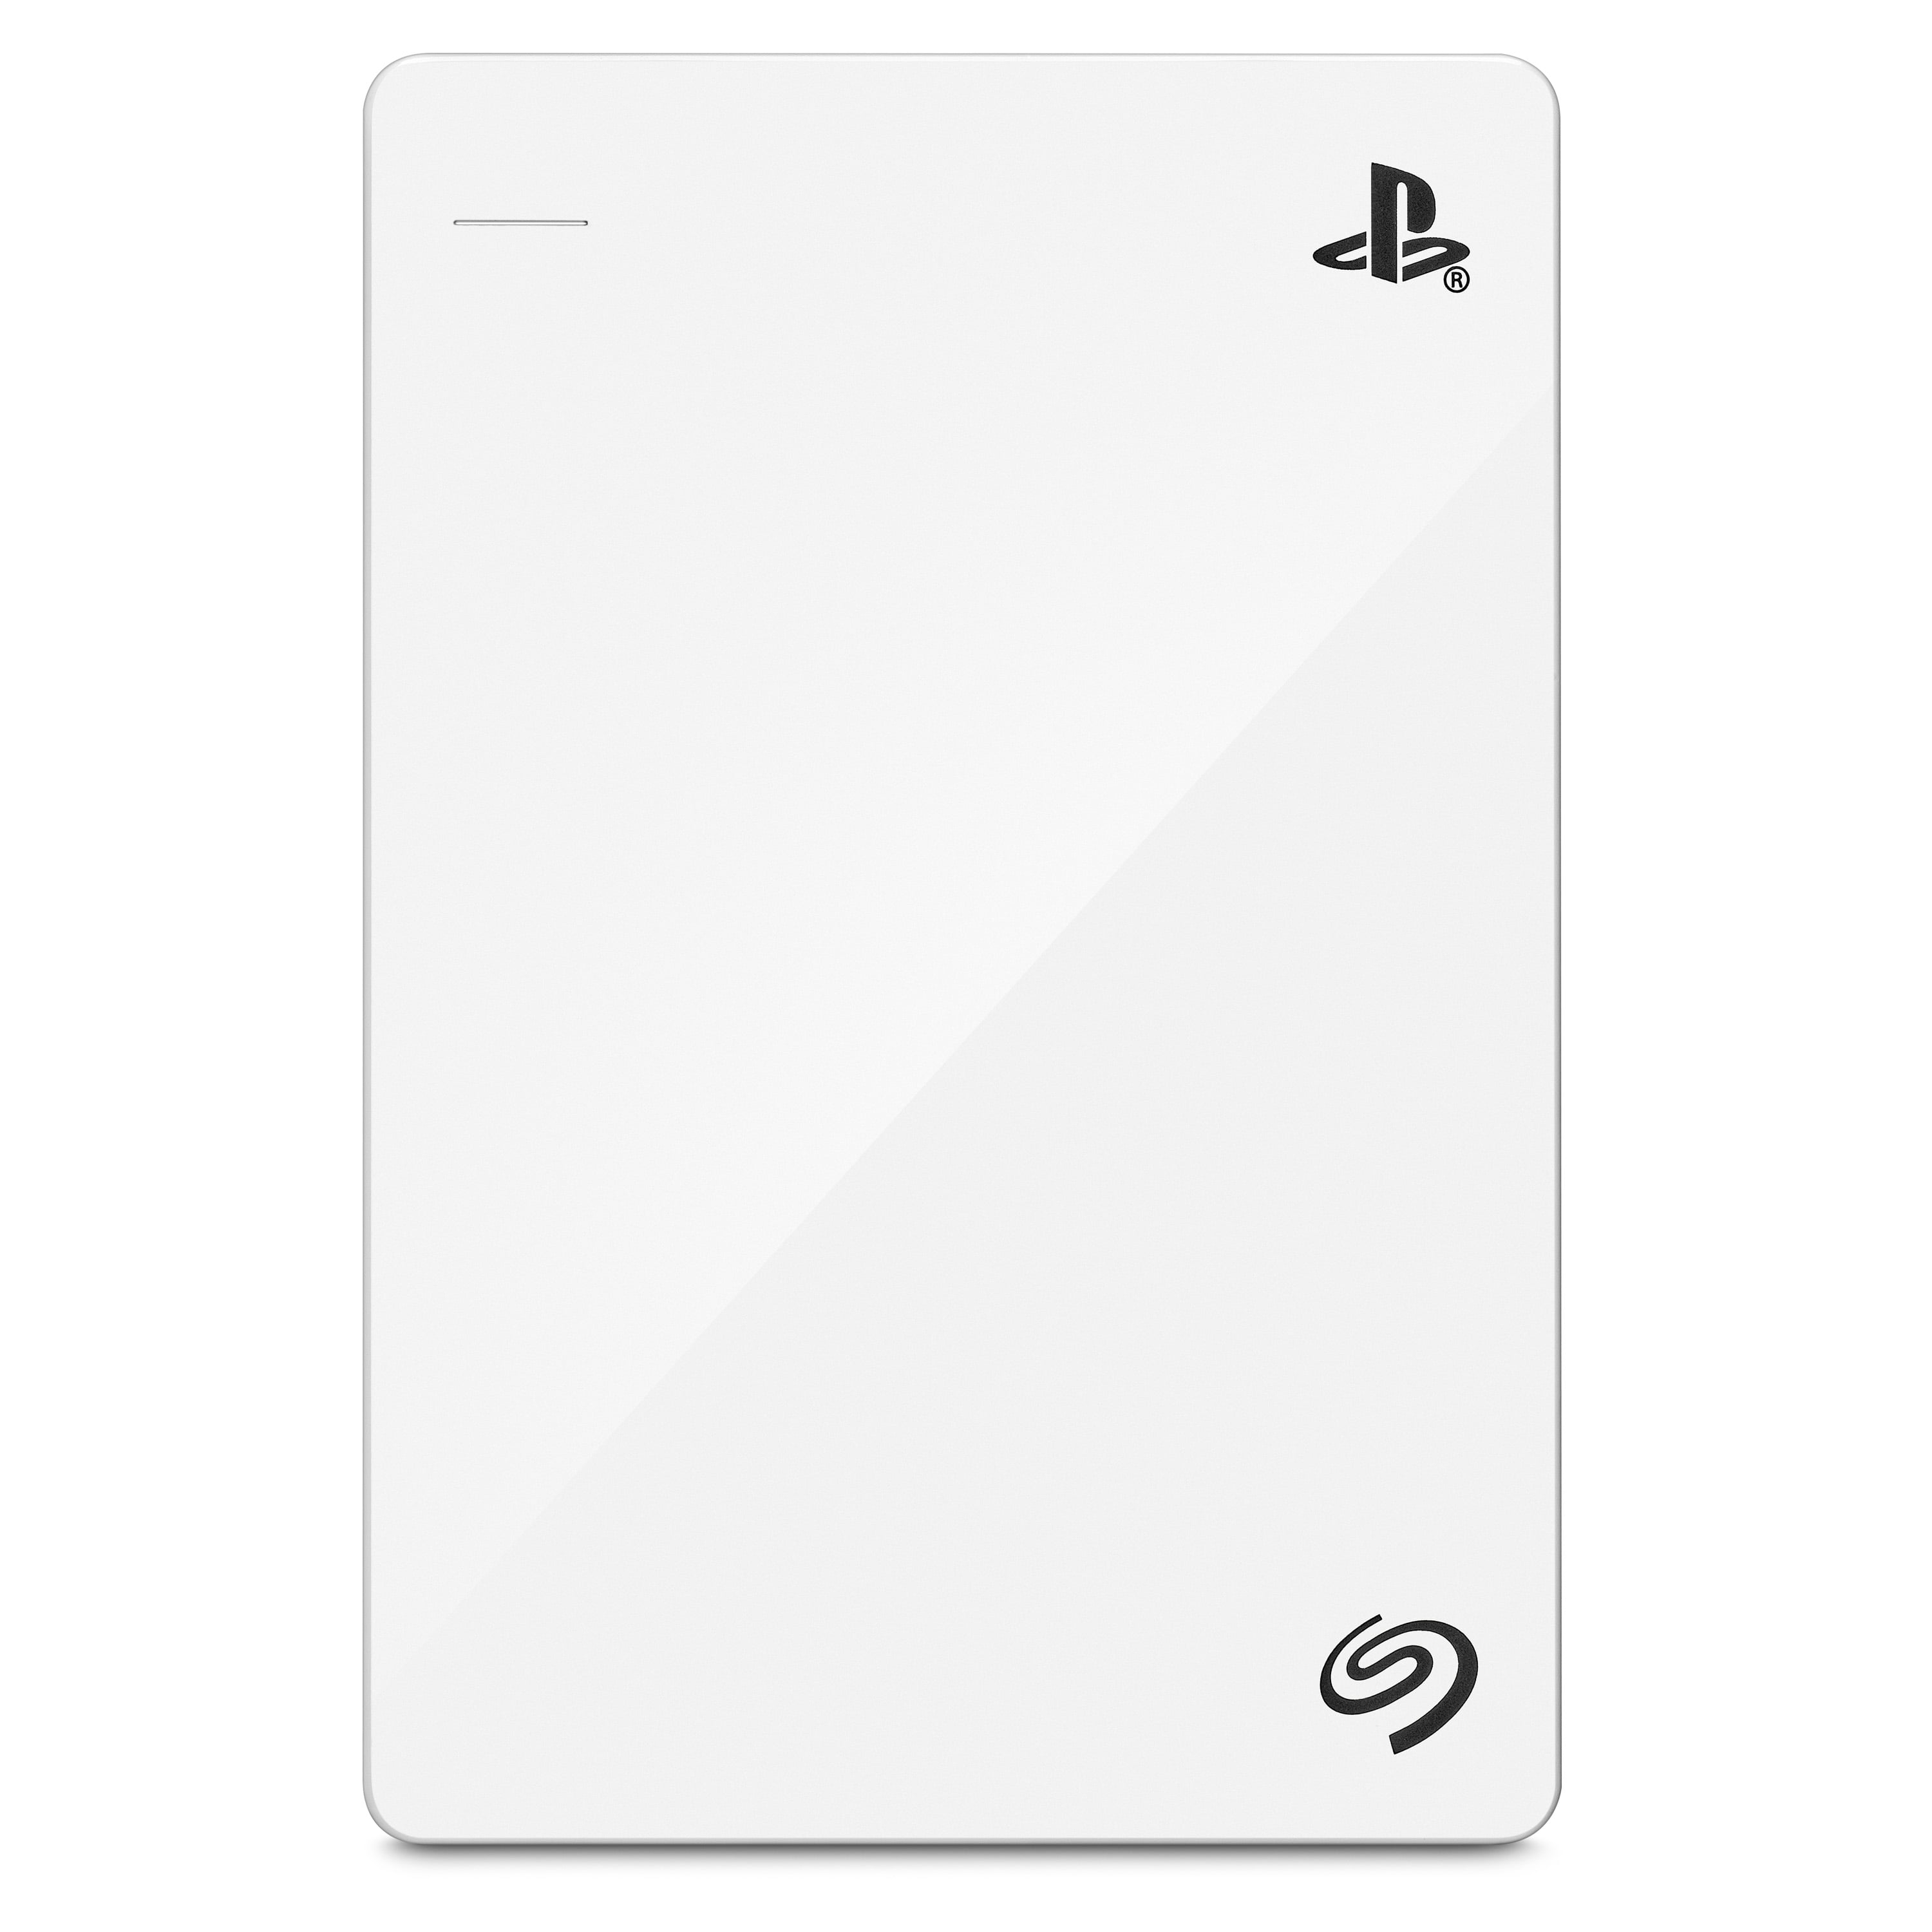 Seagate Game Drive for PlayStation Consoles 2TB External Portable Hard Drive  USB 3.0 Officially Licensed - White